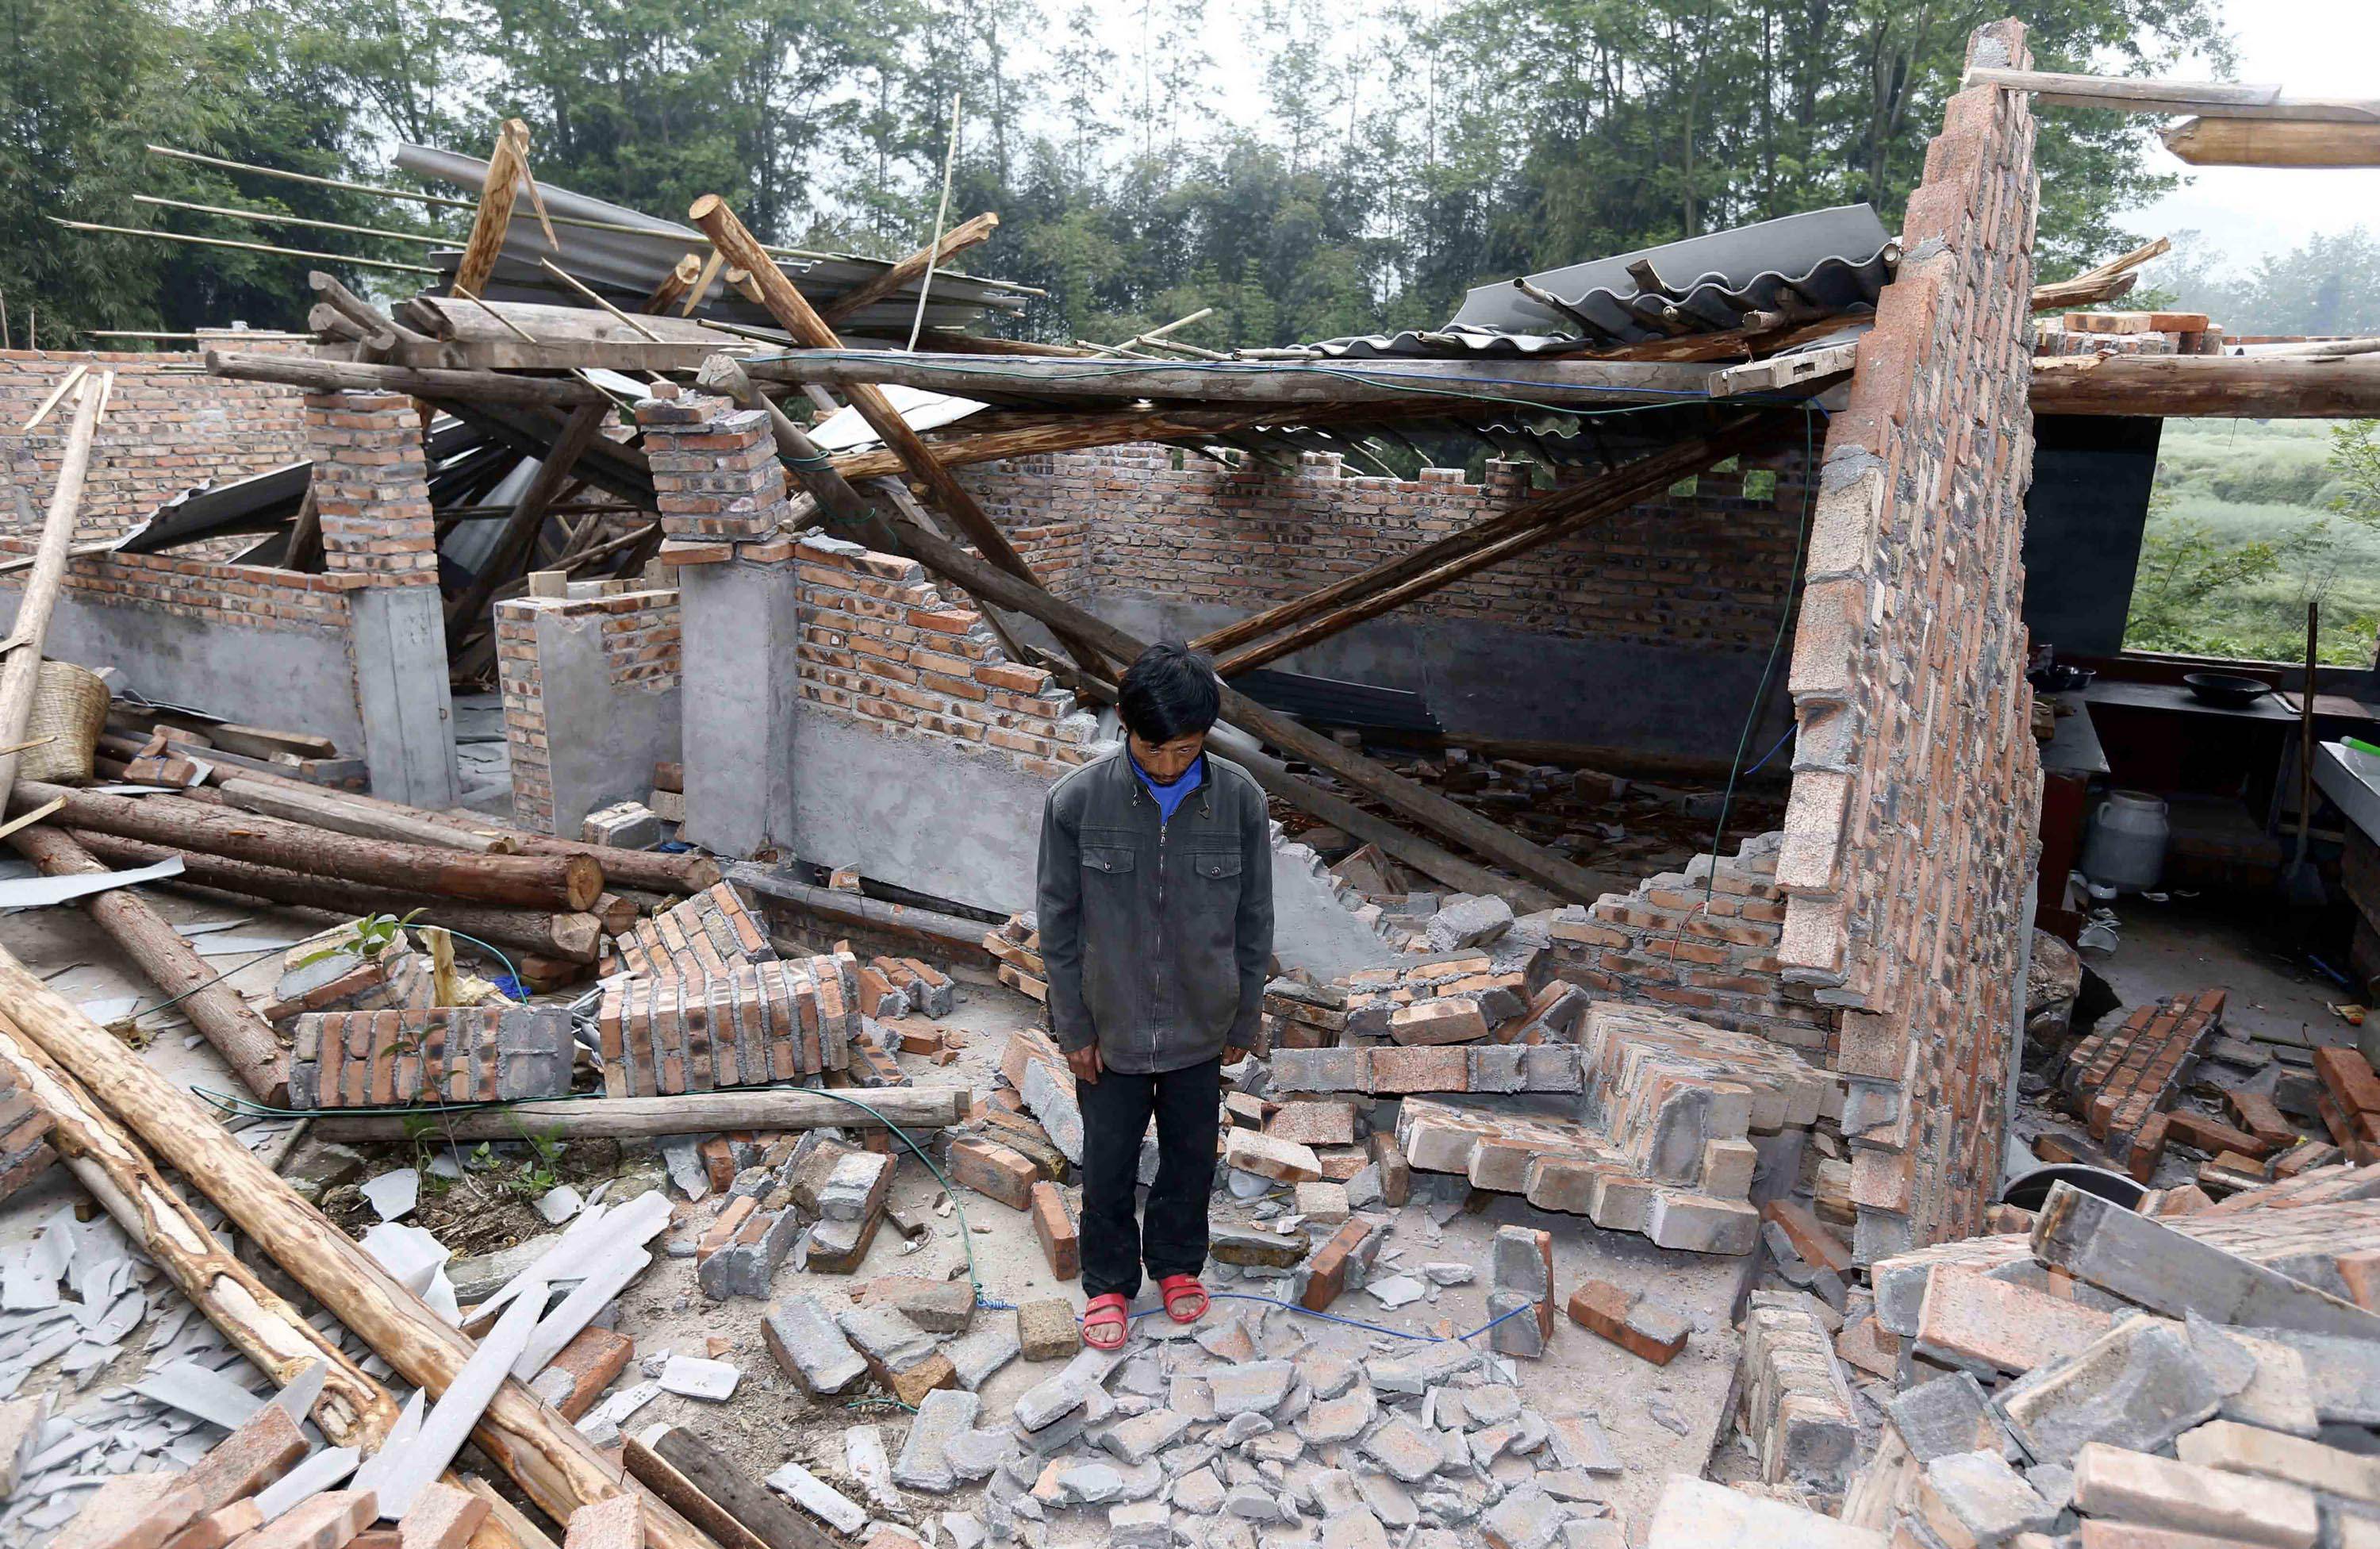 A local resident stands among the Yaan earthquake ruins in southwest China's Sichuan province. Photo: AFP